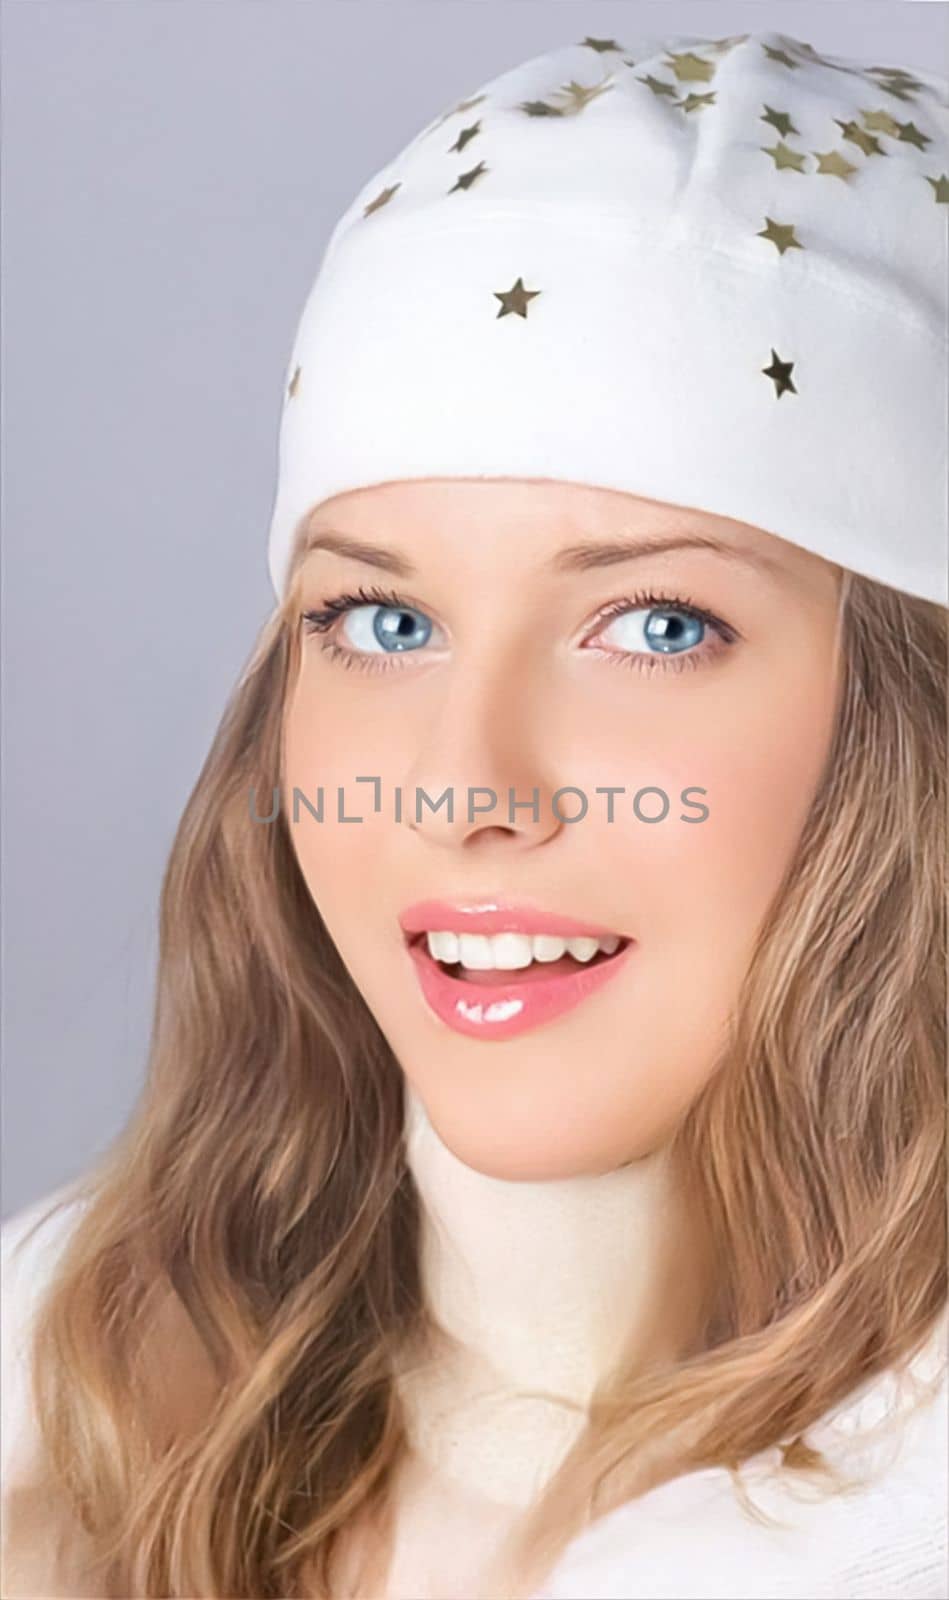 Elegant and fashionable lady wearing a white benny hat to wish you a Merry Christmas and a Happy New Year. Gorgeous brunette girl enjoying the winter holidays, Christmas, and New Year.